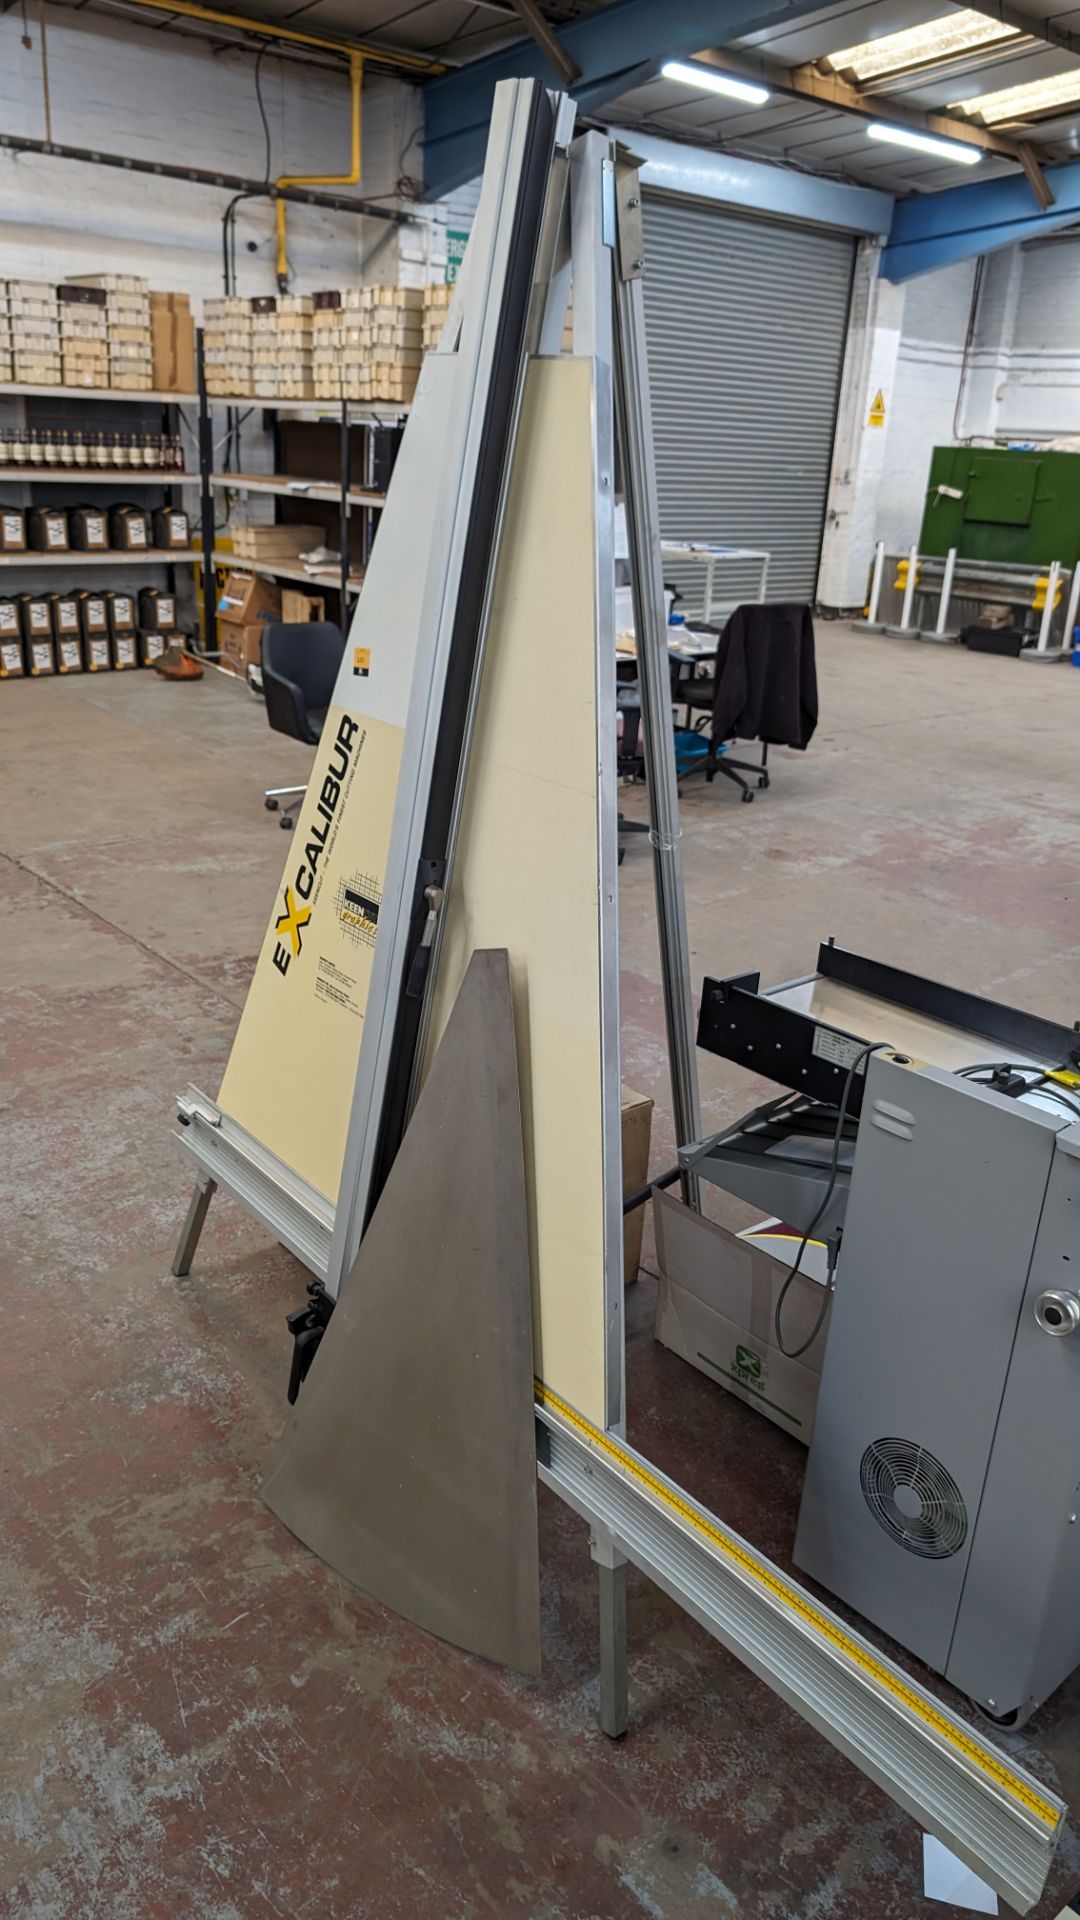 Keencut Graphics Excalibur A frame cutter. Height approximately 2330mm, max width including measuri - Bild 10 aus 13